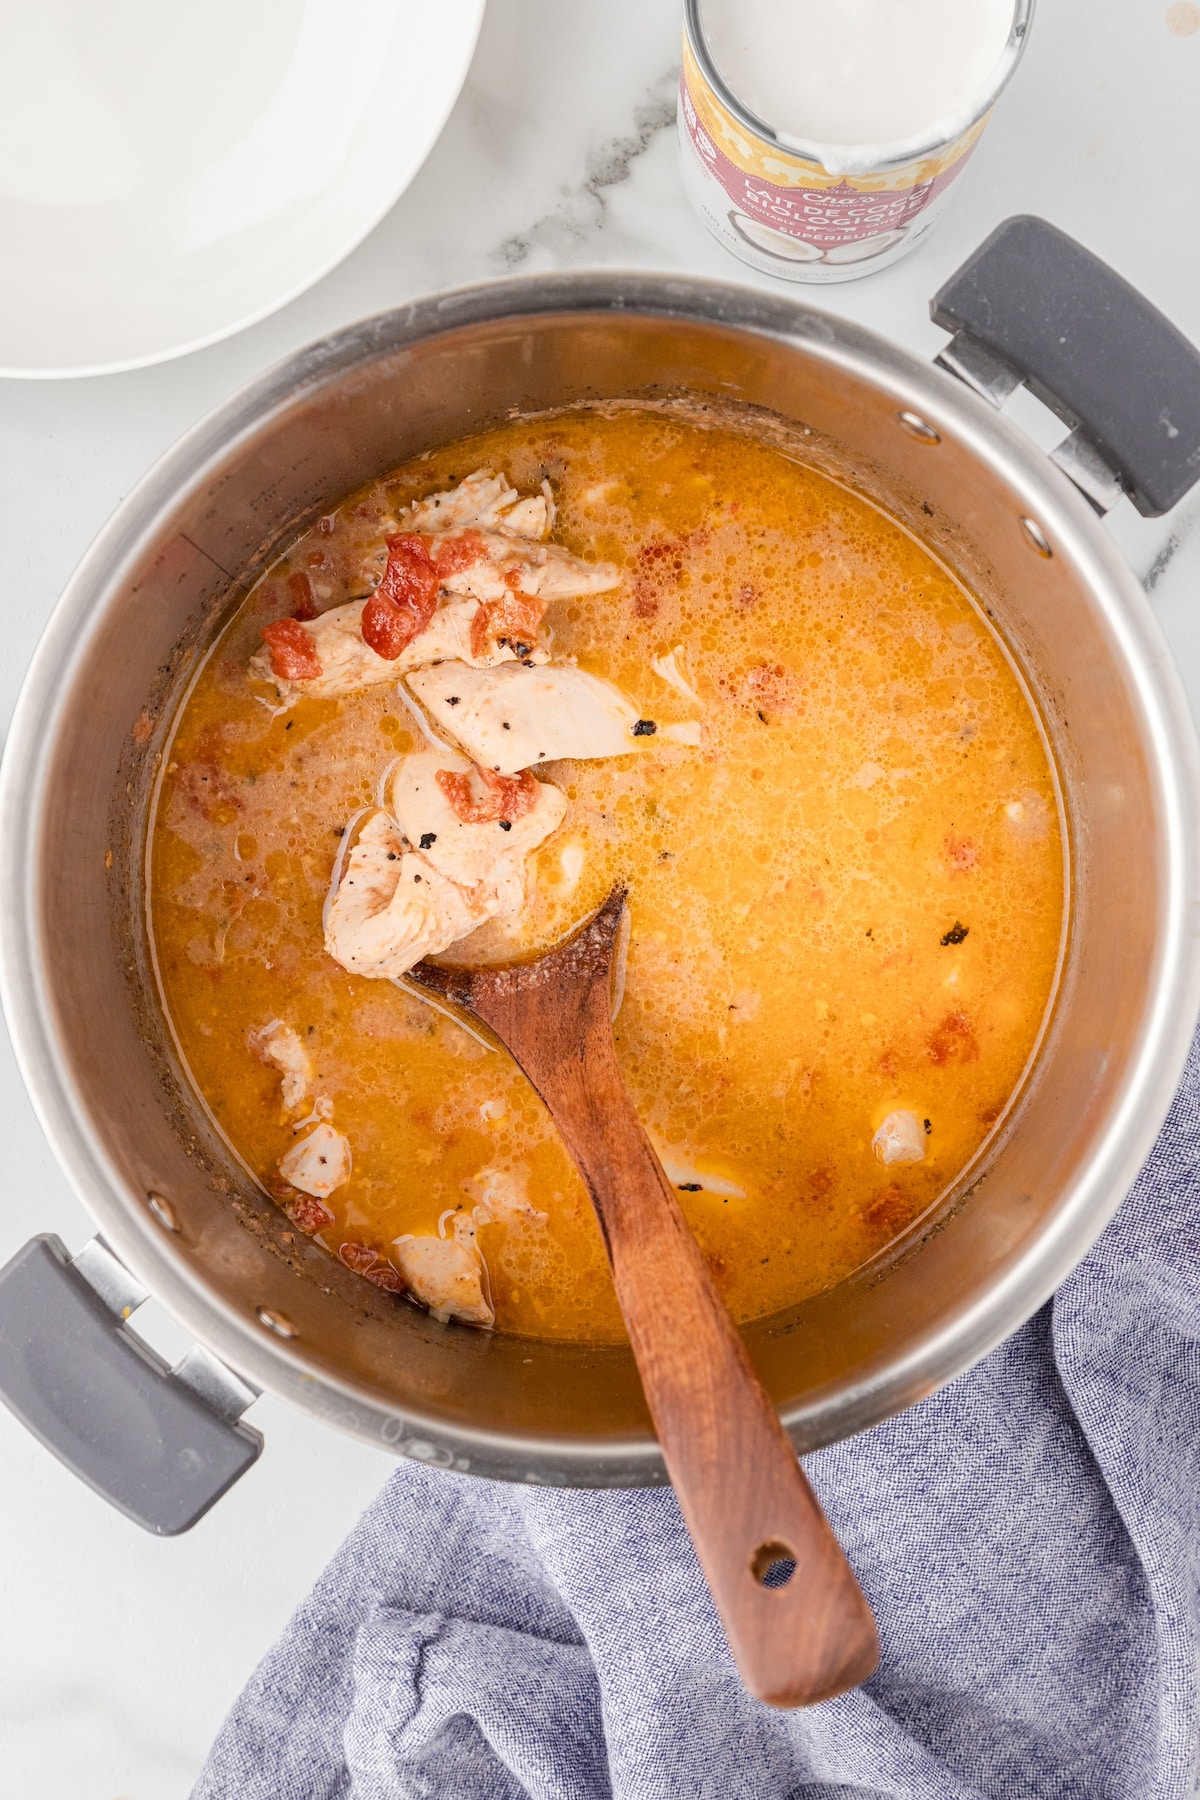 Cook the chicken in the Instant Pot